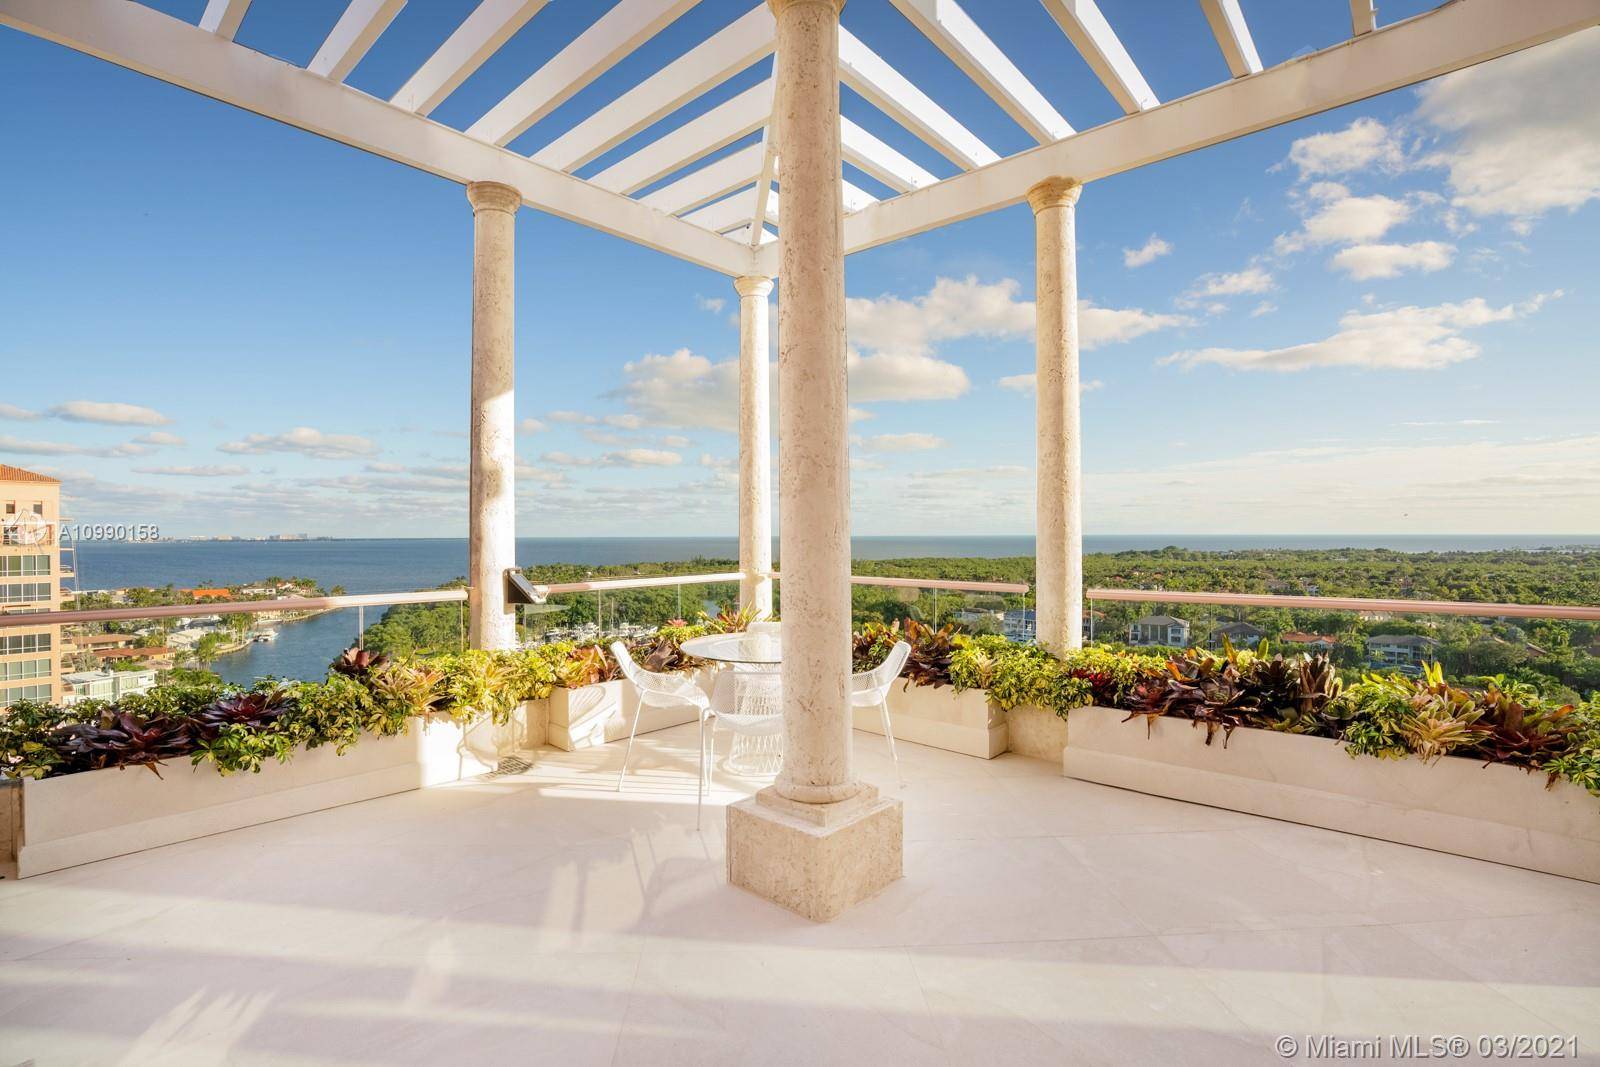 A palace in the sky ! One of a kind, two story Tower Suite penthouse with spectacular views of Biscayne Bay and Miami skyline, 10, 500 SF of luxurious interior ...